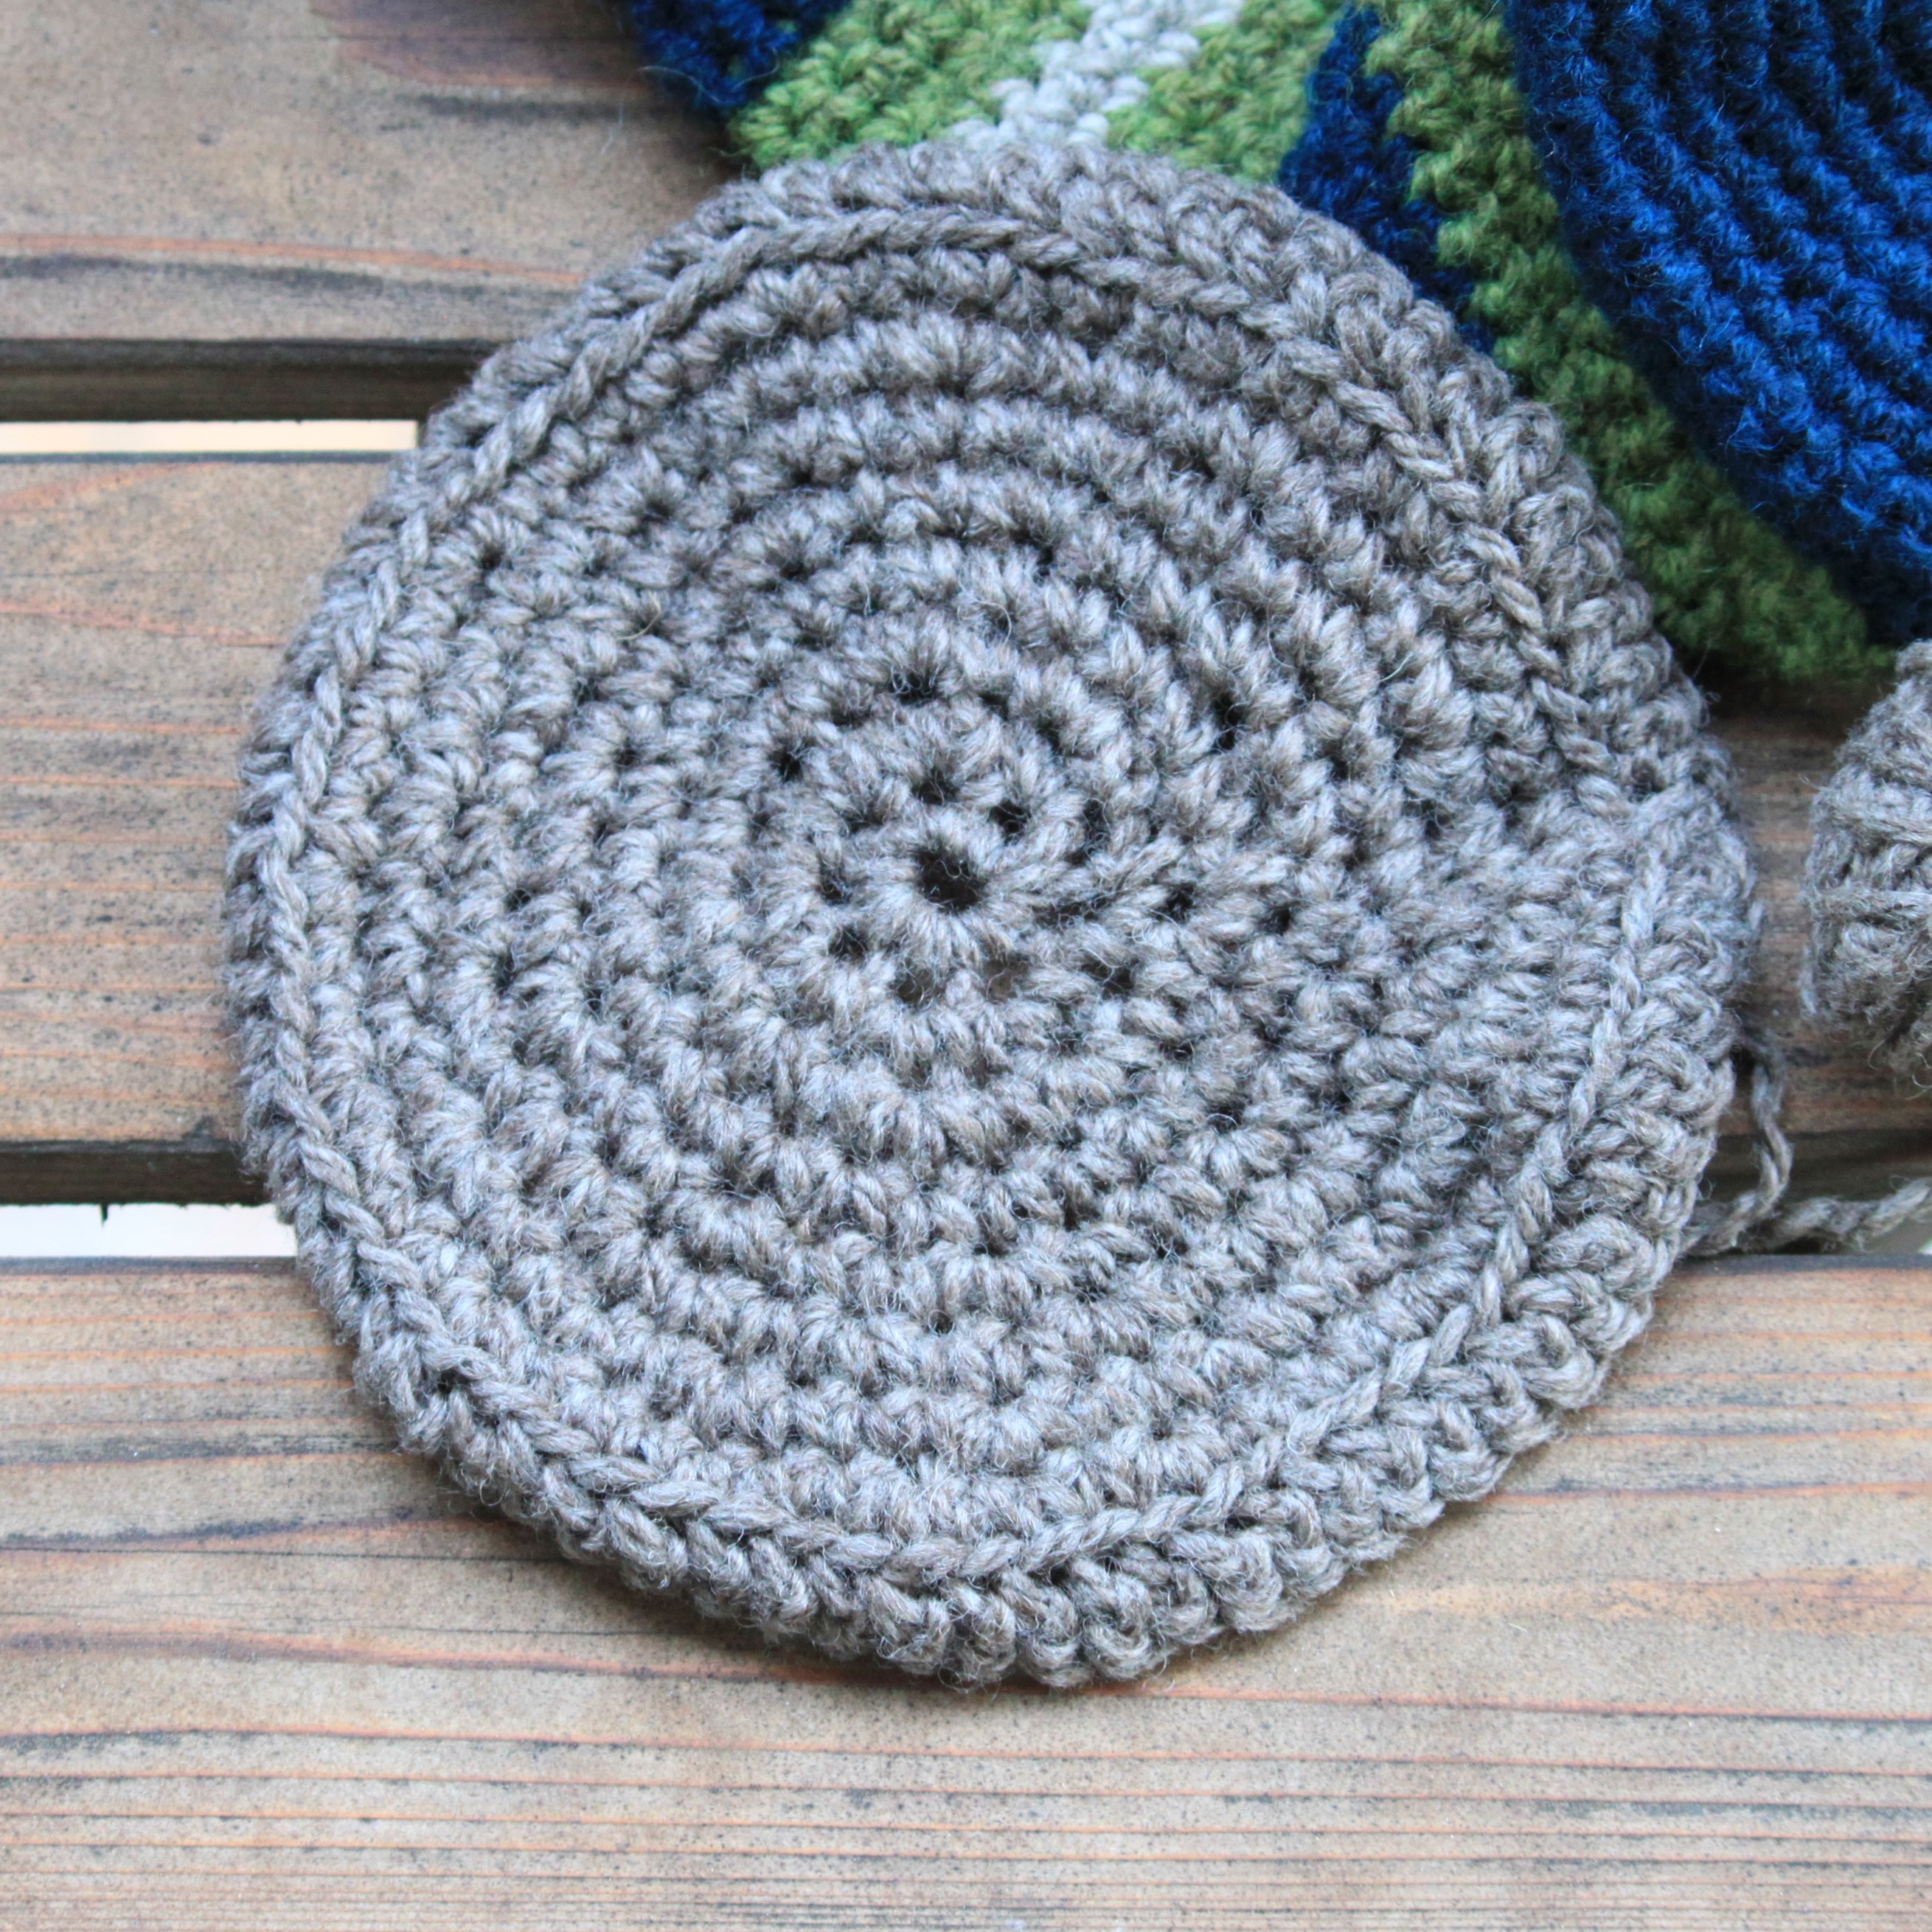 A Yarn Weight Key for Holding Two Strands Together